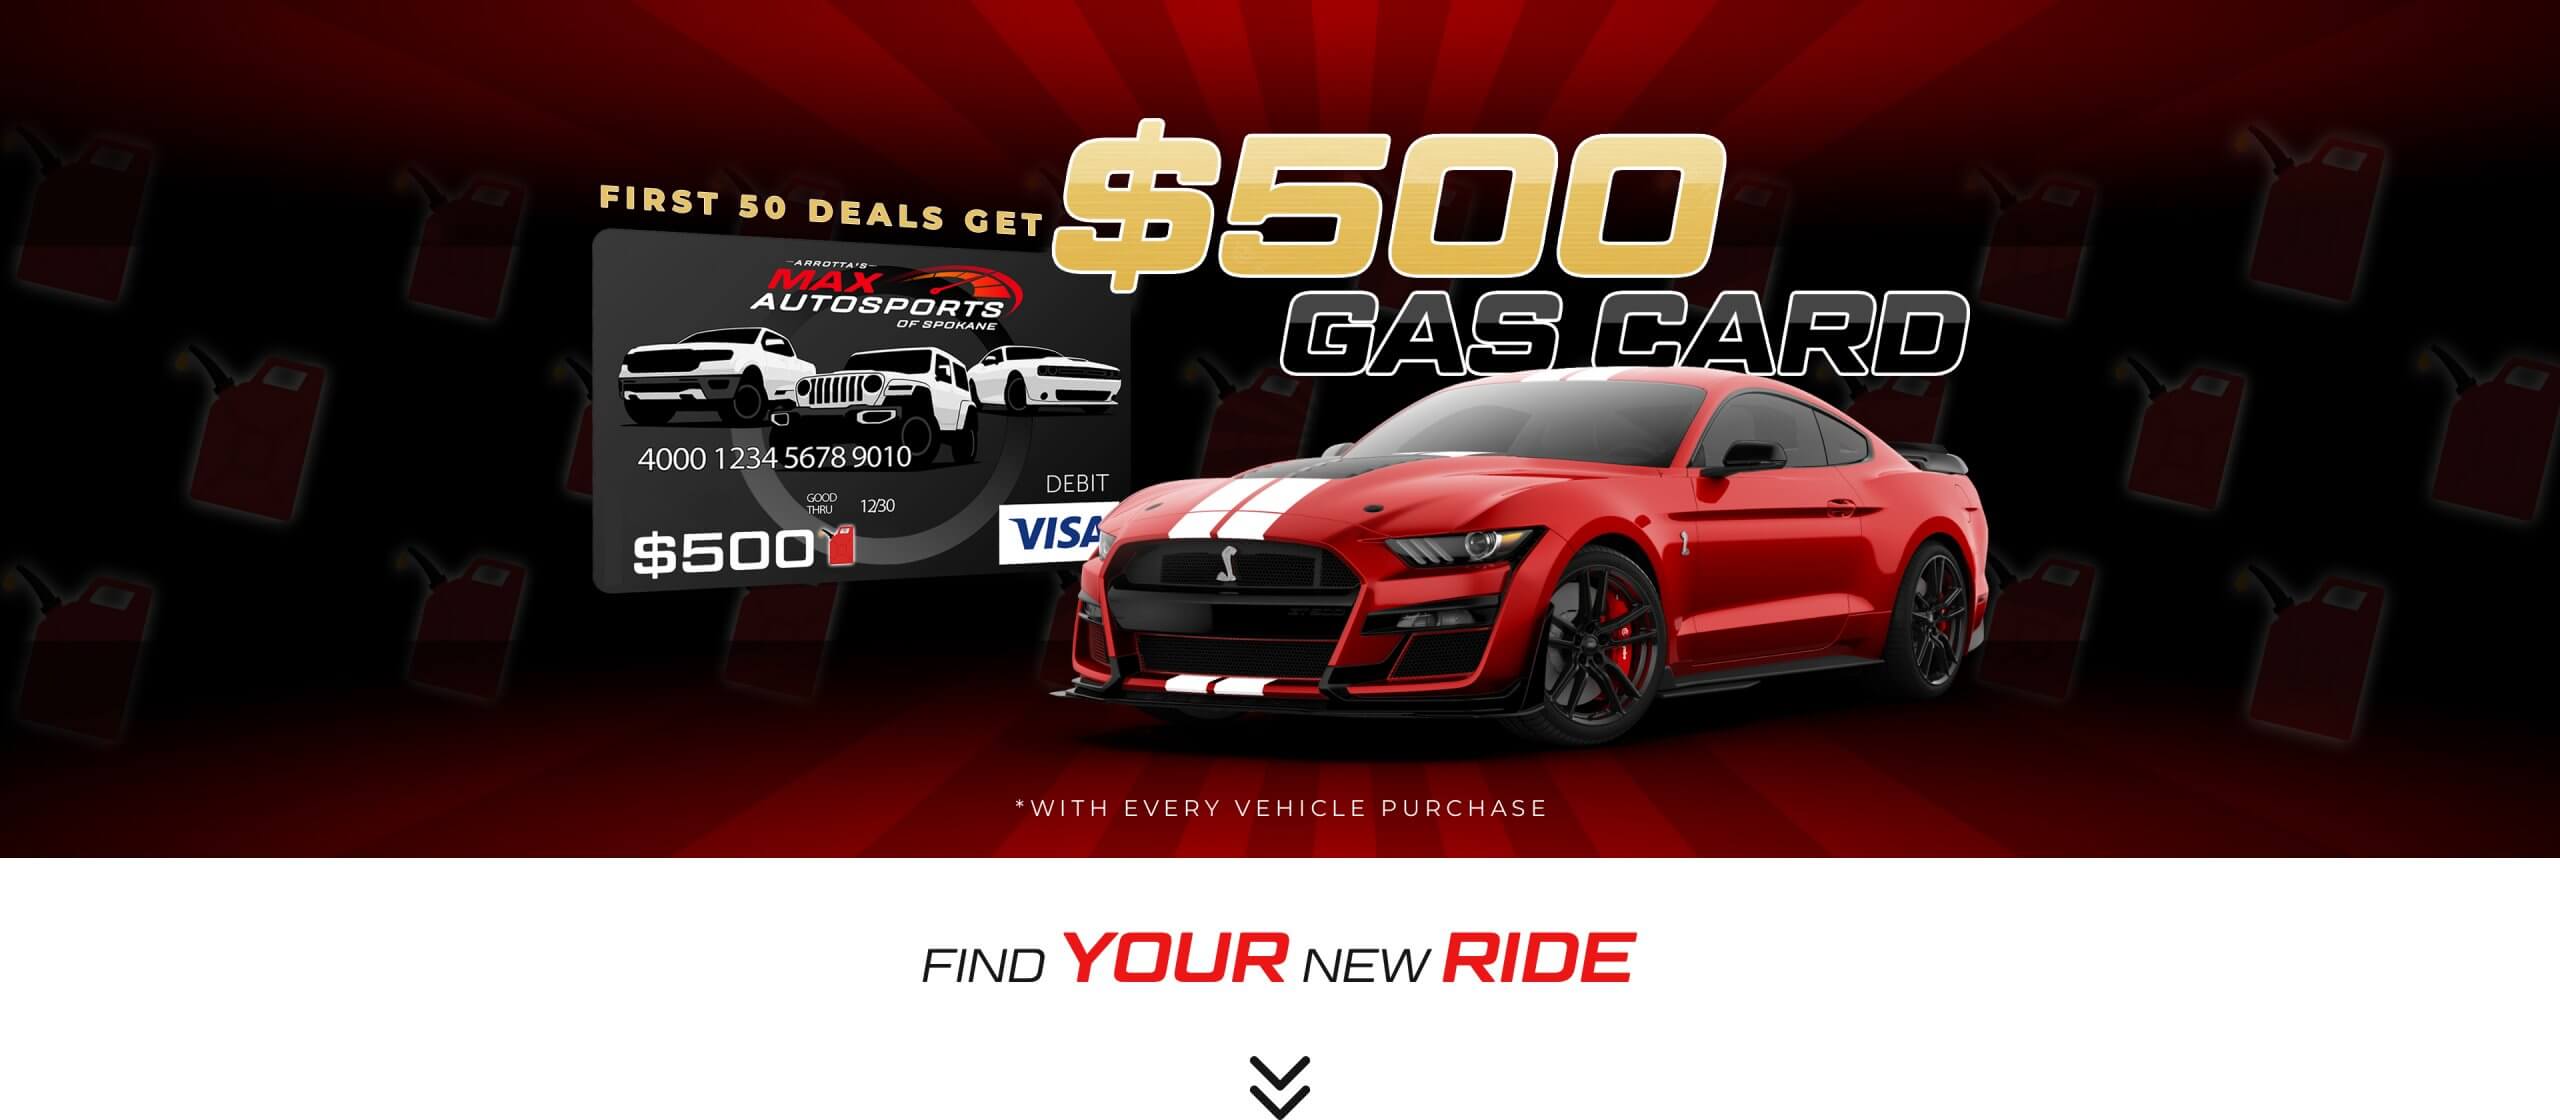 First 50 deals get $500 gift card with every vehicle purchase. Find your new ride